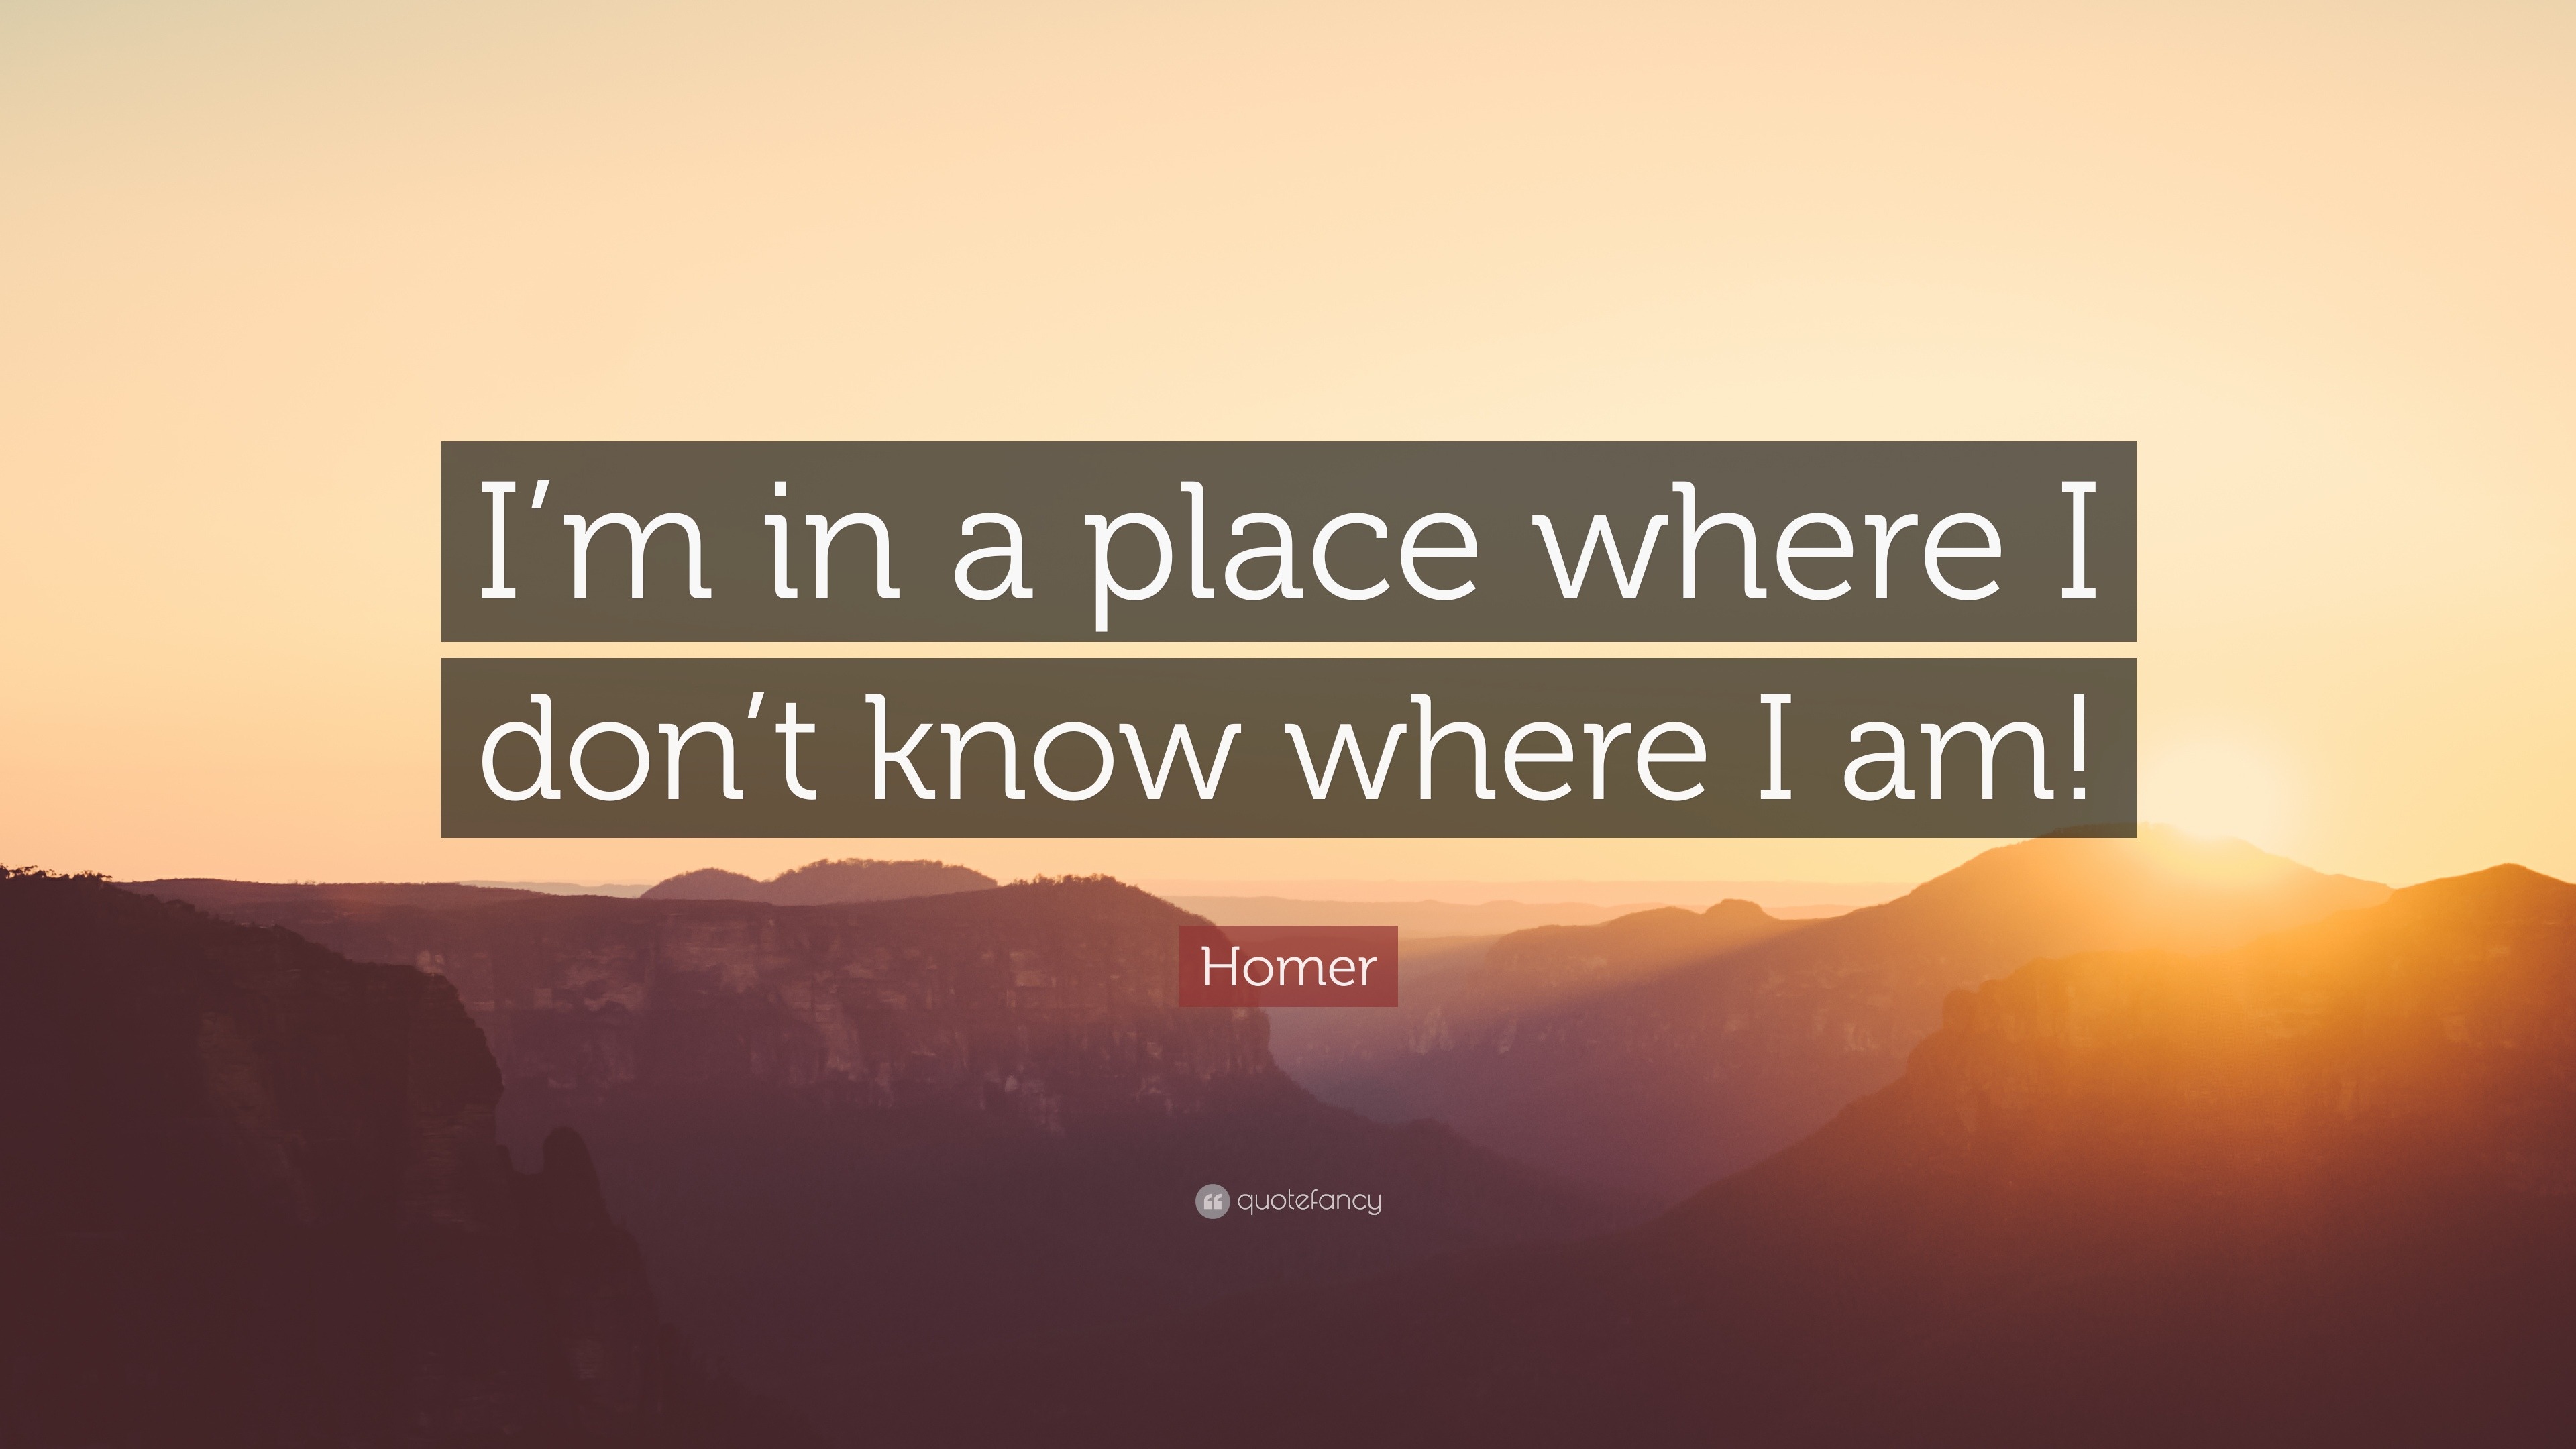 Homer Quote: “I’m in a place where I don’t know where I am!” (7 A Place That I Don't Know Lyrics